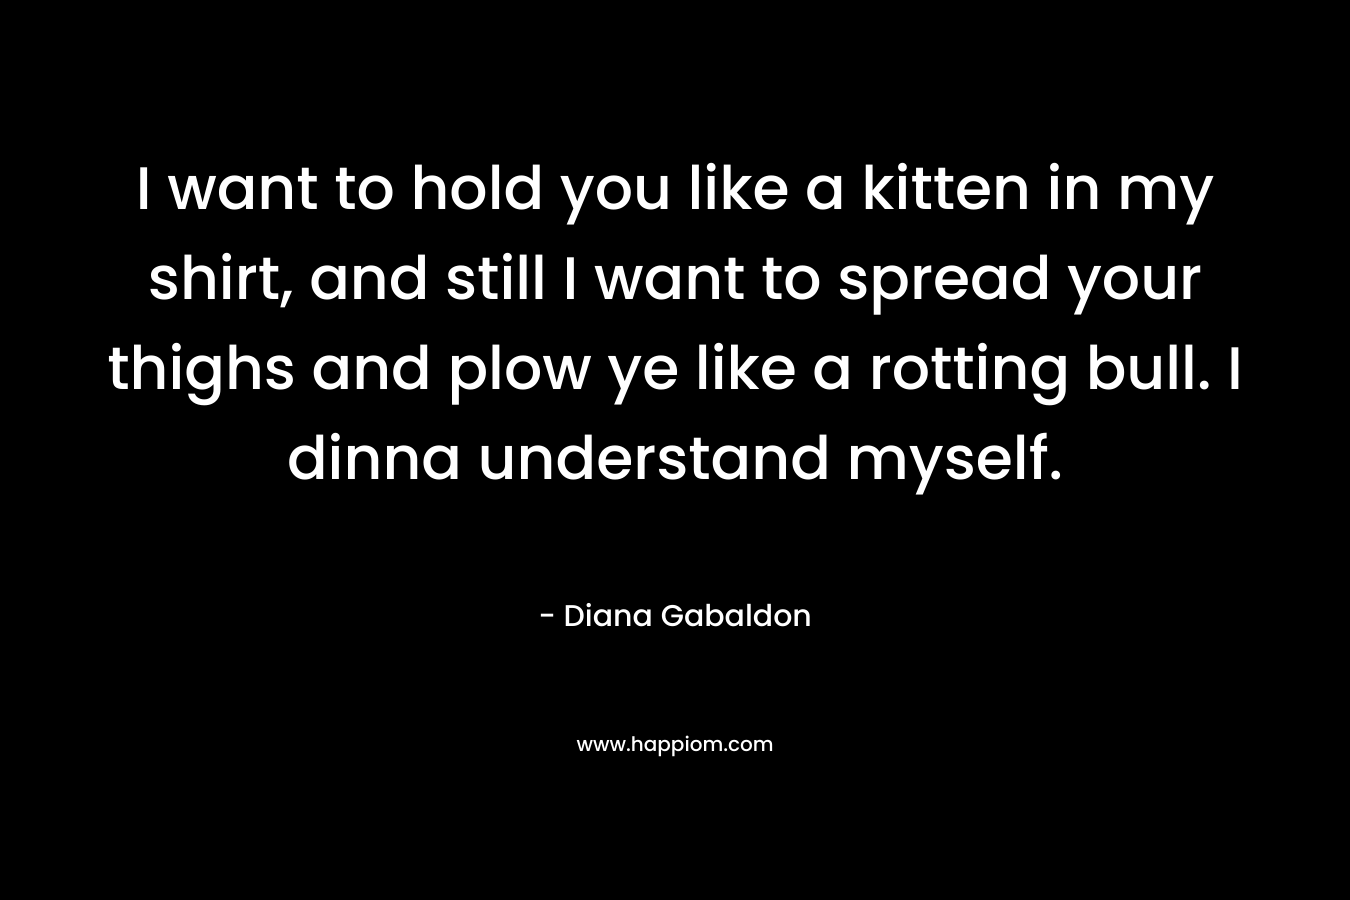 I want to hold you like a kitten in my shirt, and still I want to spread your thighs and plow ye like a rotting bull. I dinna understand myself. – Diana Gabaldon